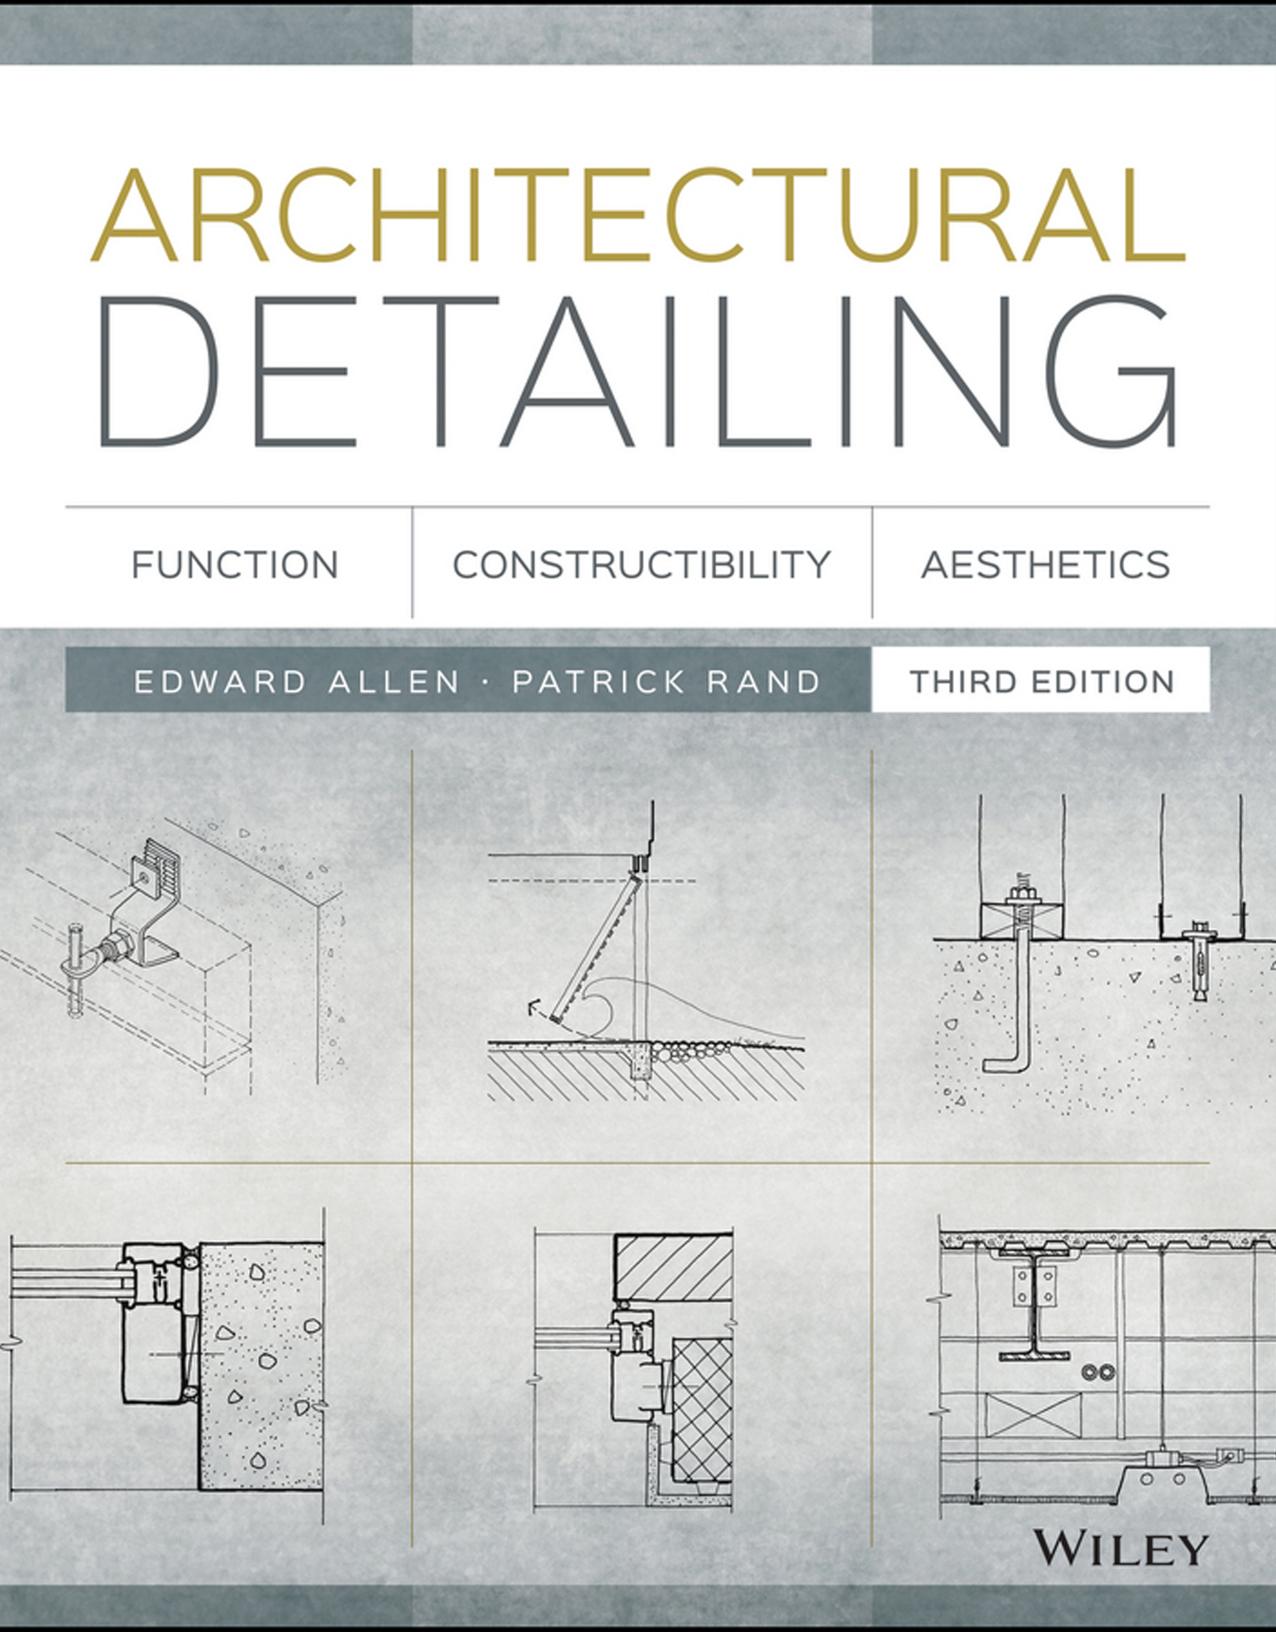 Architectural Detailing: Function, Constructibility and Aesthetics, Third Edition